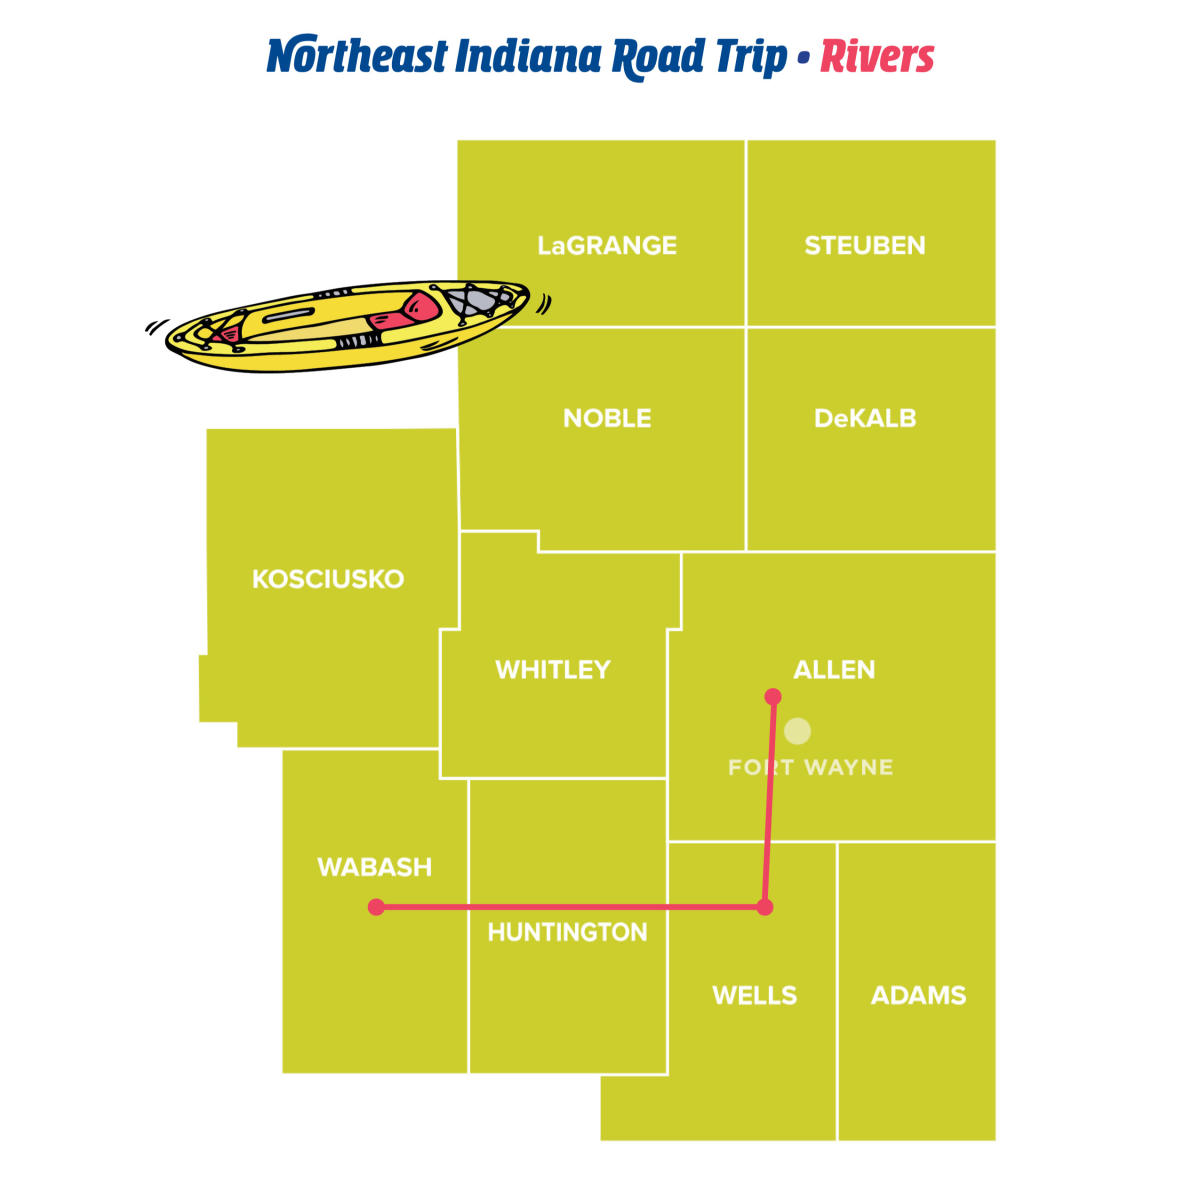 Rivers - Northeast Indiana Road Trips